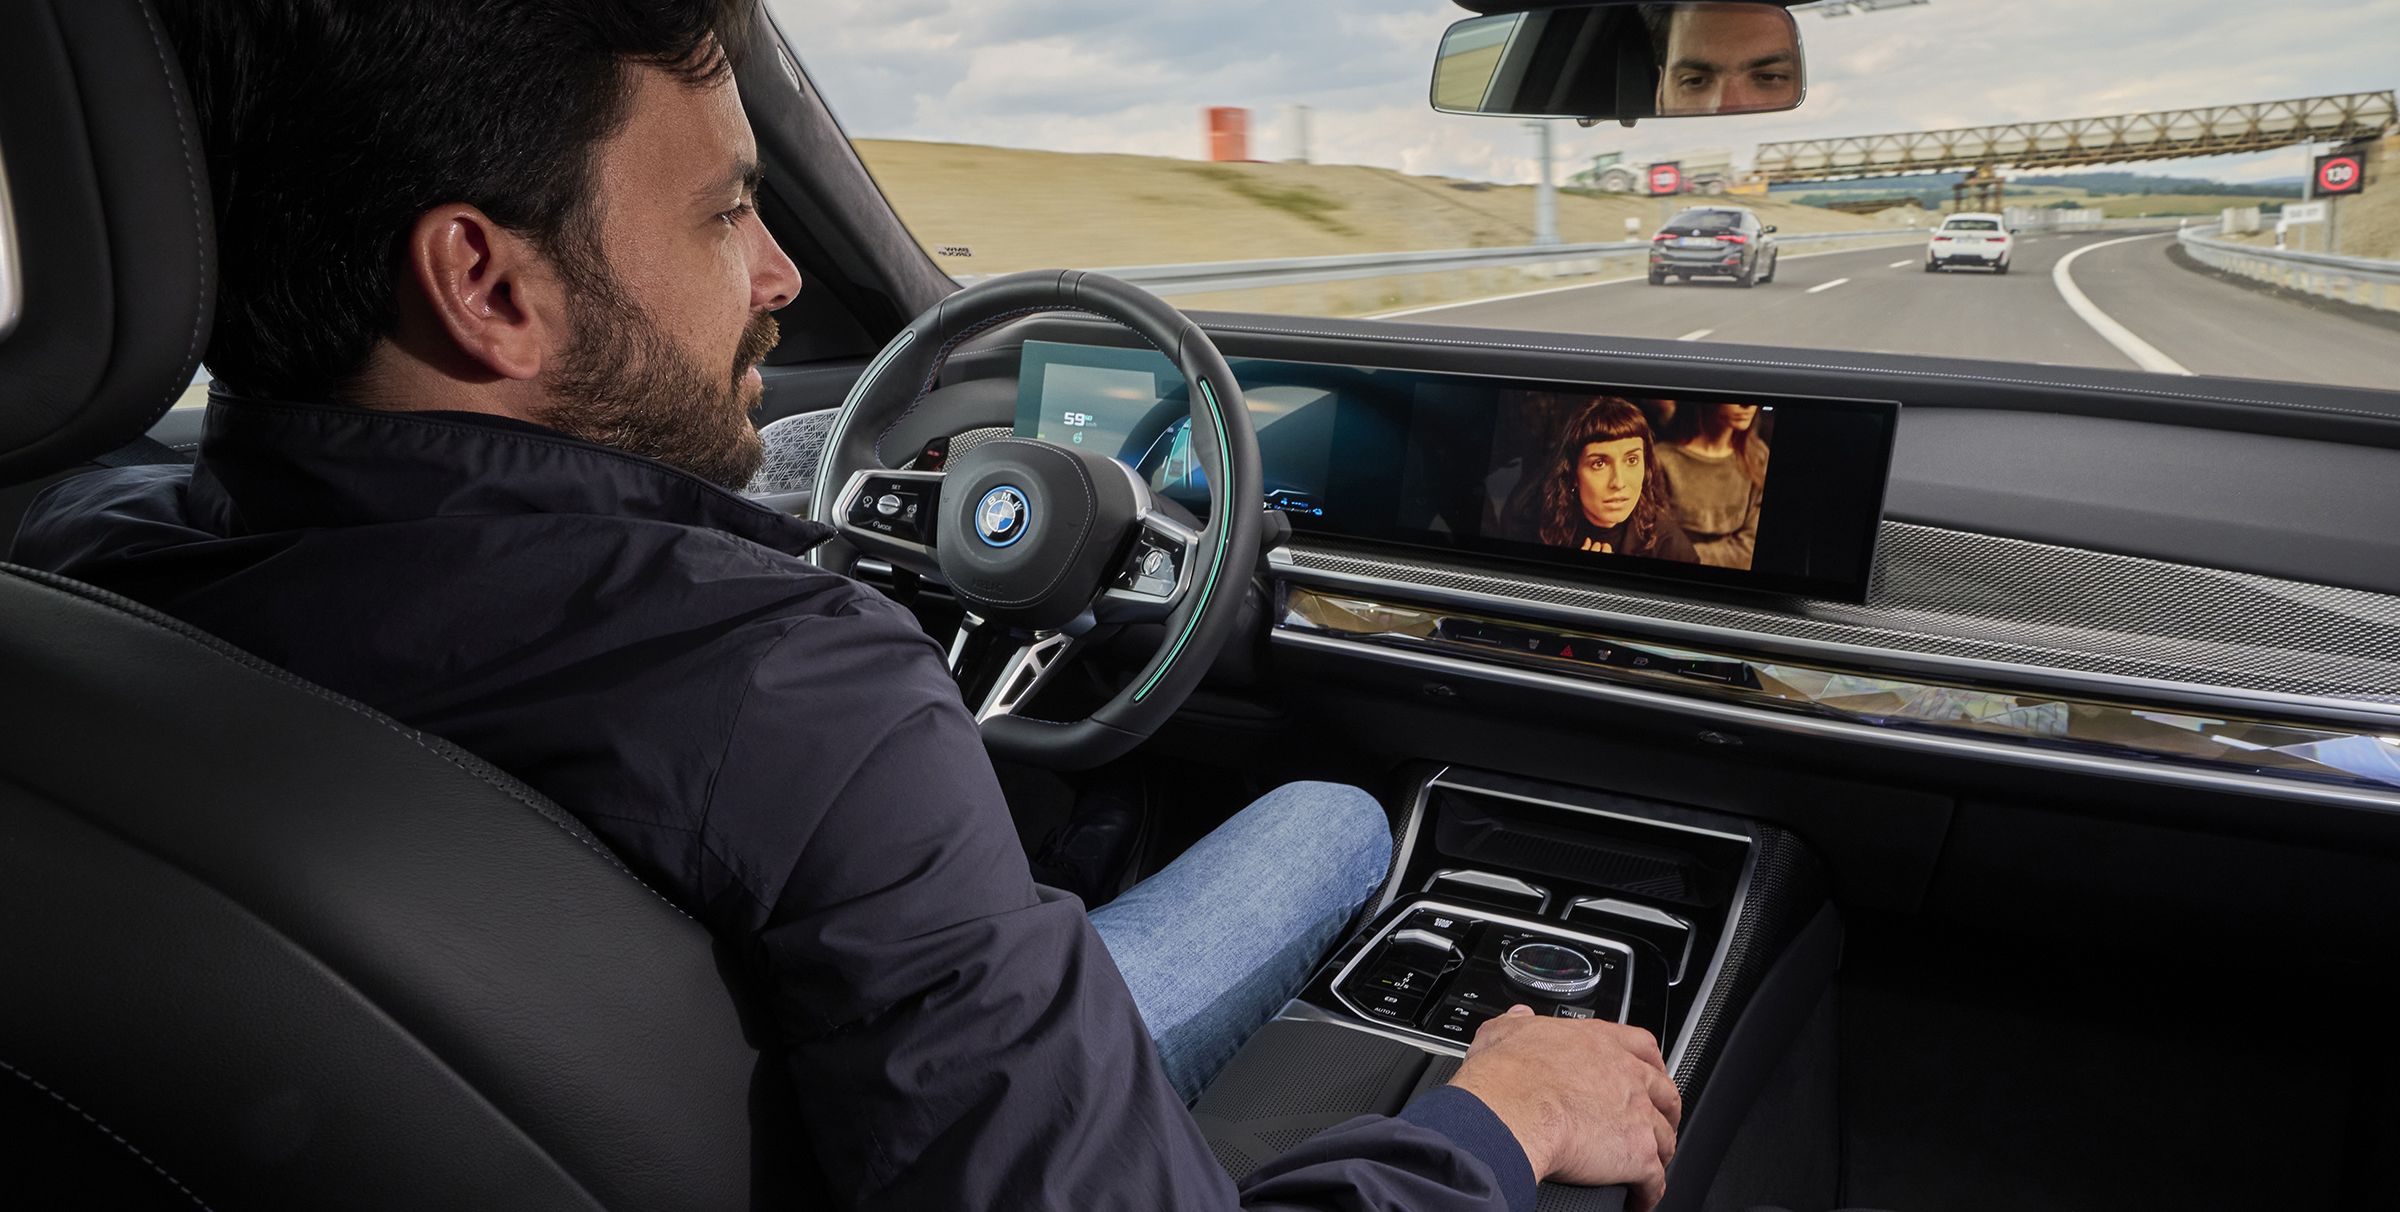 BMW's Level 3 System Will Let Drivers Watch TV